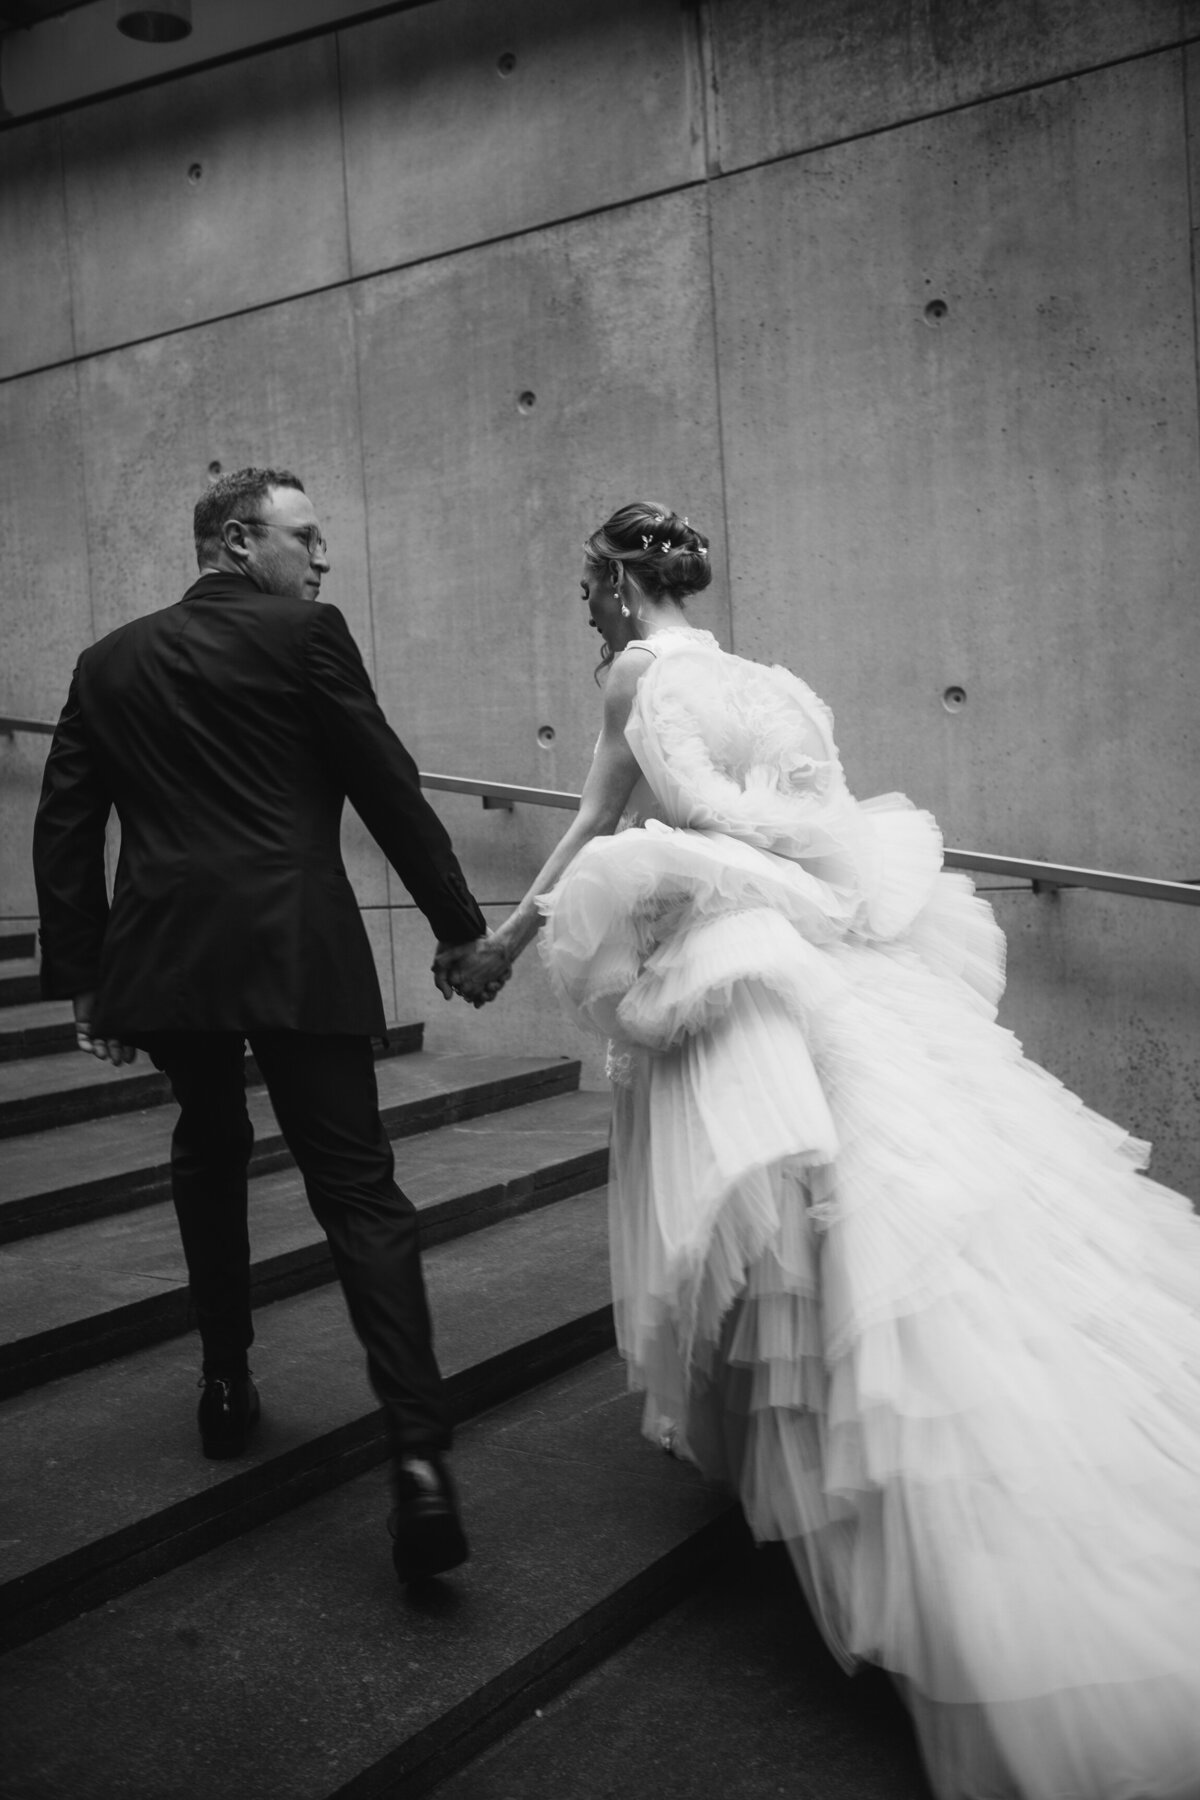 Bride and groom walking up stairway together, black tux couture wedding gown